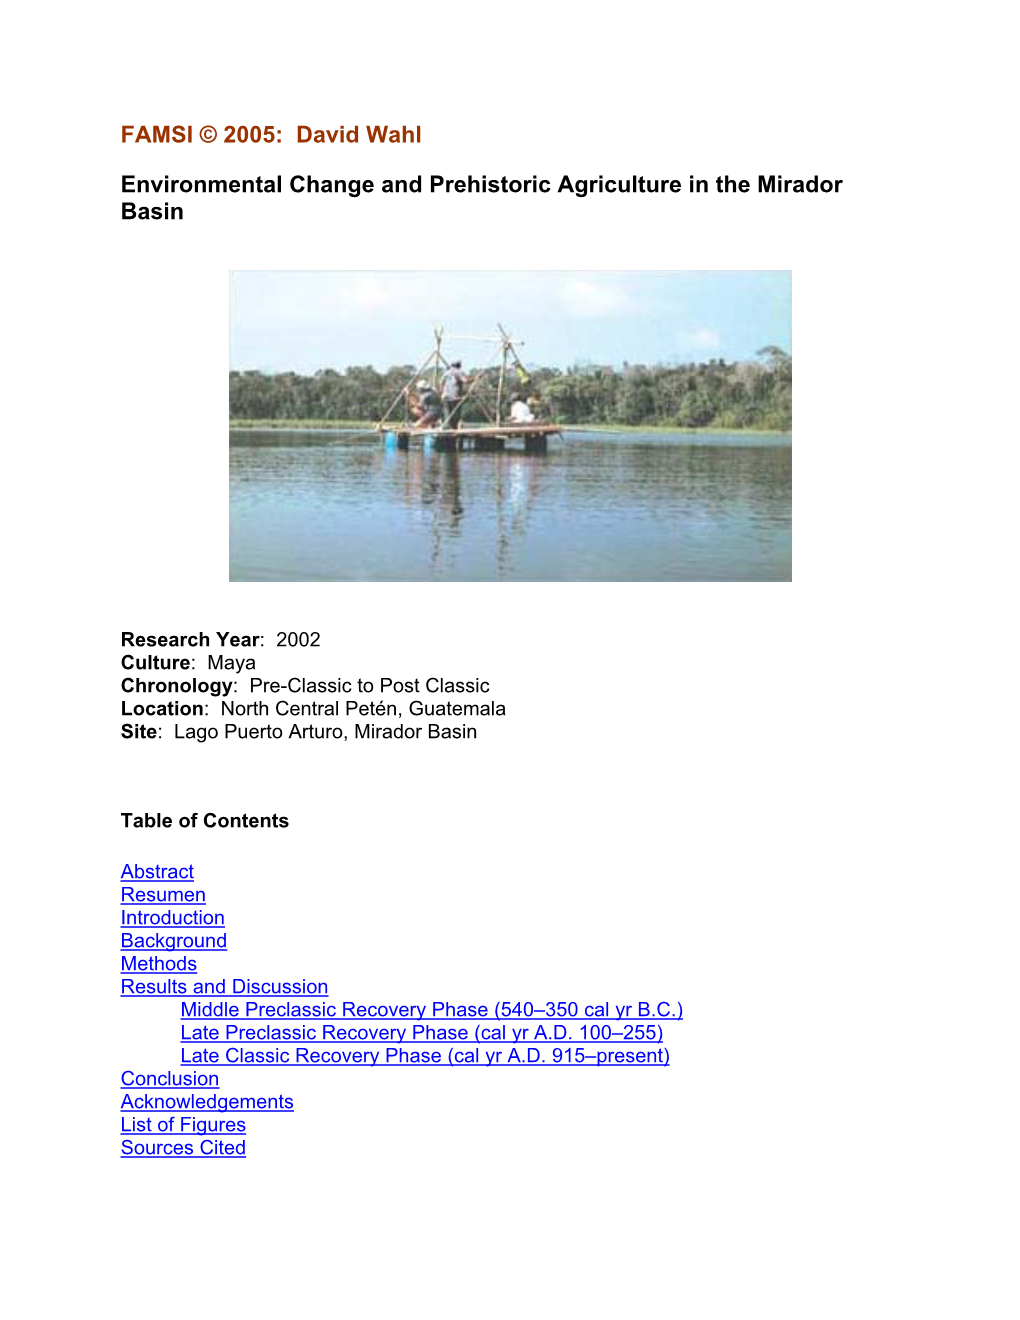 Environmental Change and Prehistoric Agriculture in the Mirador Basin